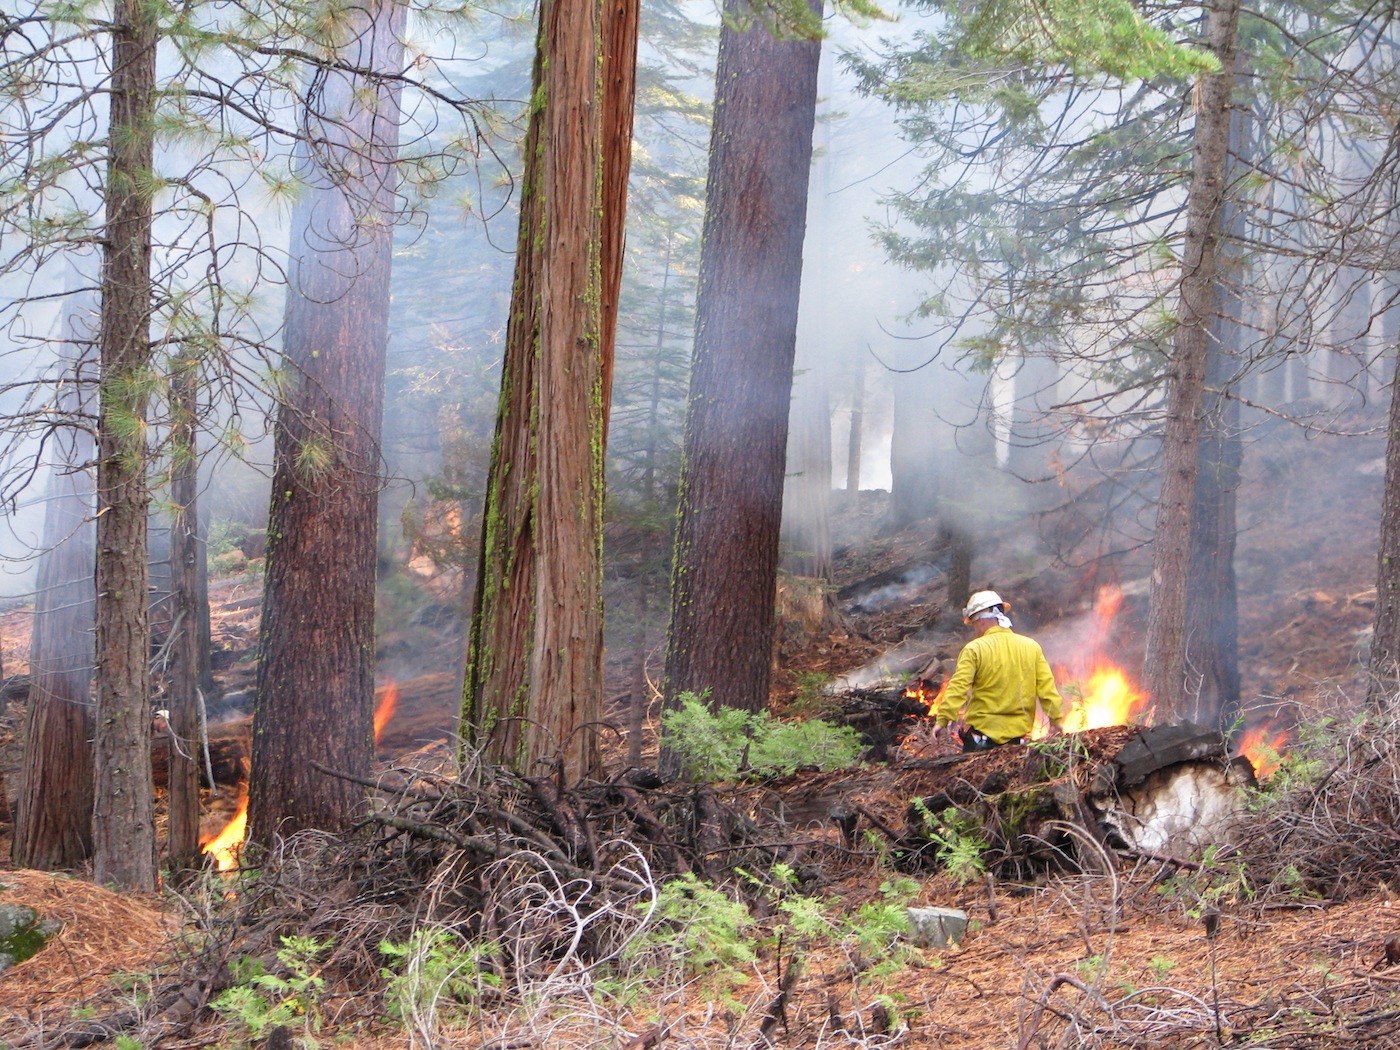 A firefighter in yellow walks among small fires in a young forest